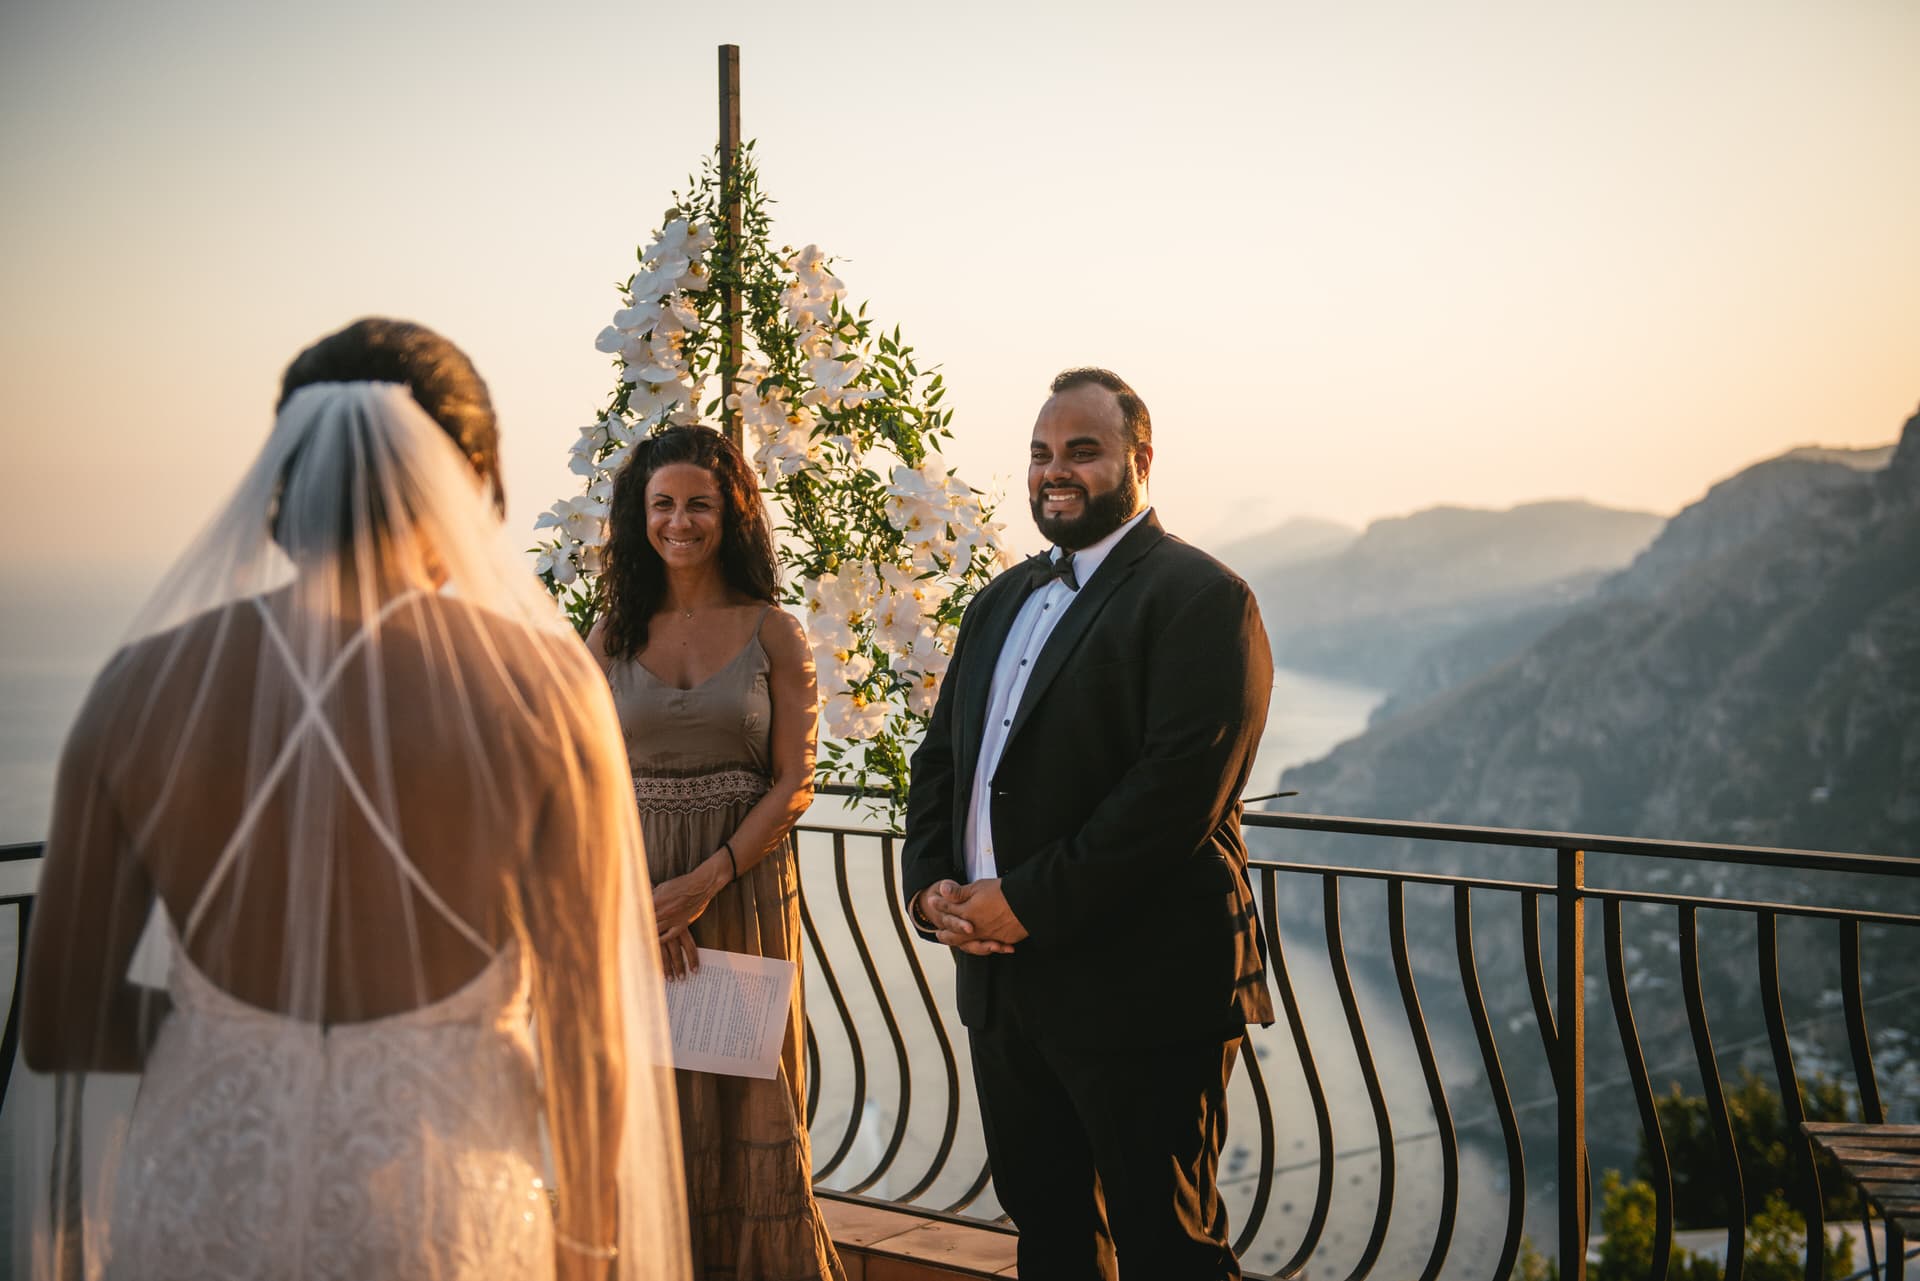 Bride walking down the aisle to her future husband with the town of Positano in the background at sunset